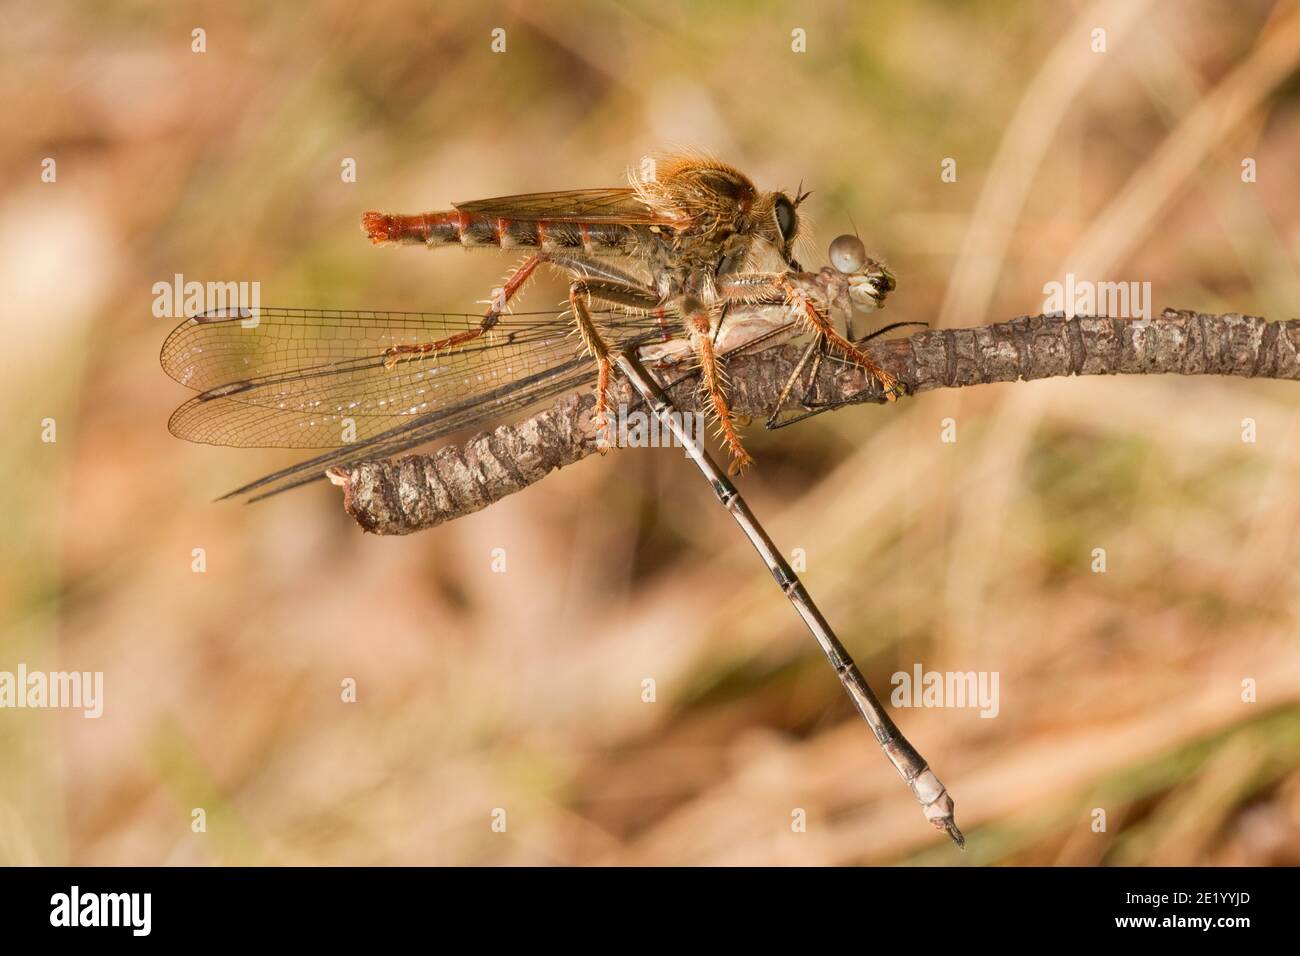 Unidentified Robber Fly male, Stenopogon sp. or Scleropogon sp., Asilidae. Feeding on Great Spreadwing Damselfly immature male, Archilestes grandis, L Stock Photo